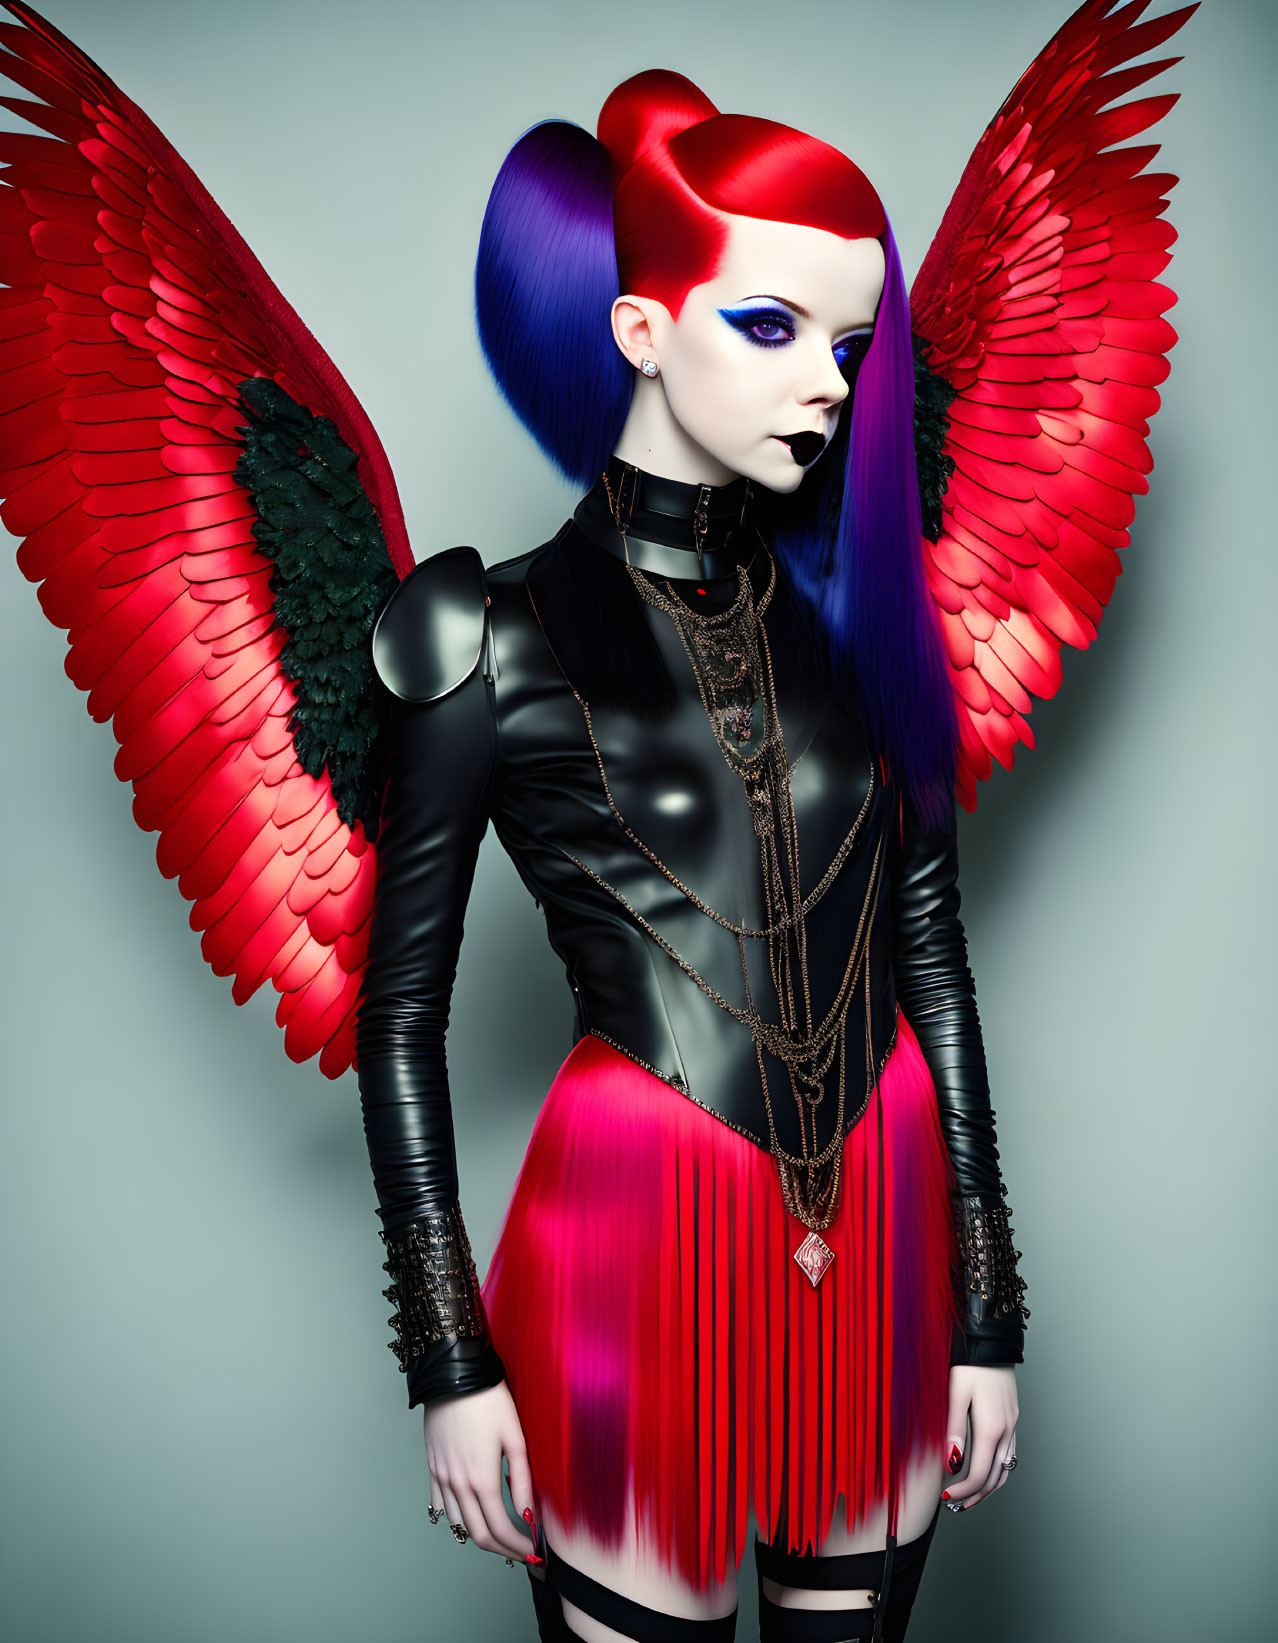 Portrait of a person with red wings, blue and red hair, dark outfit, and blue lipstick